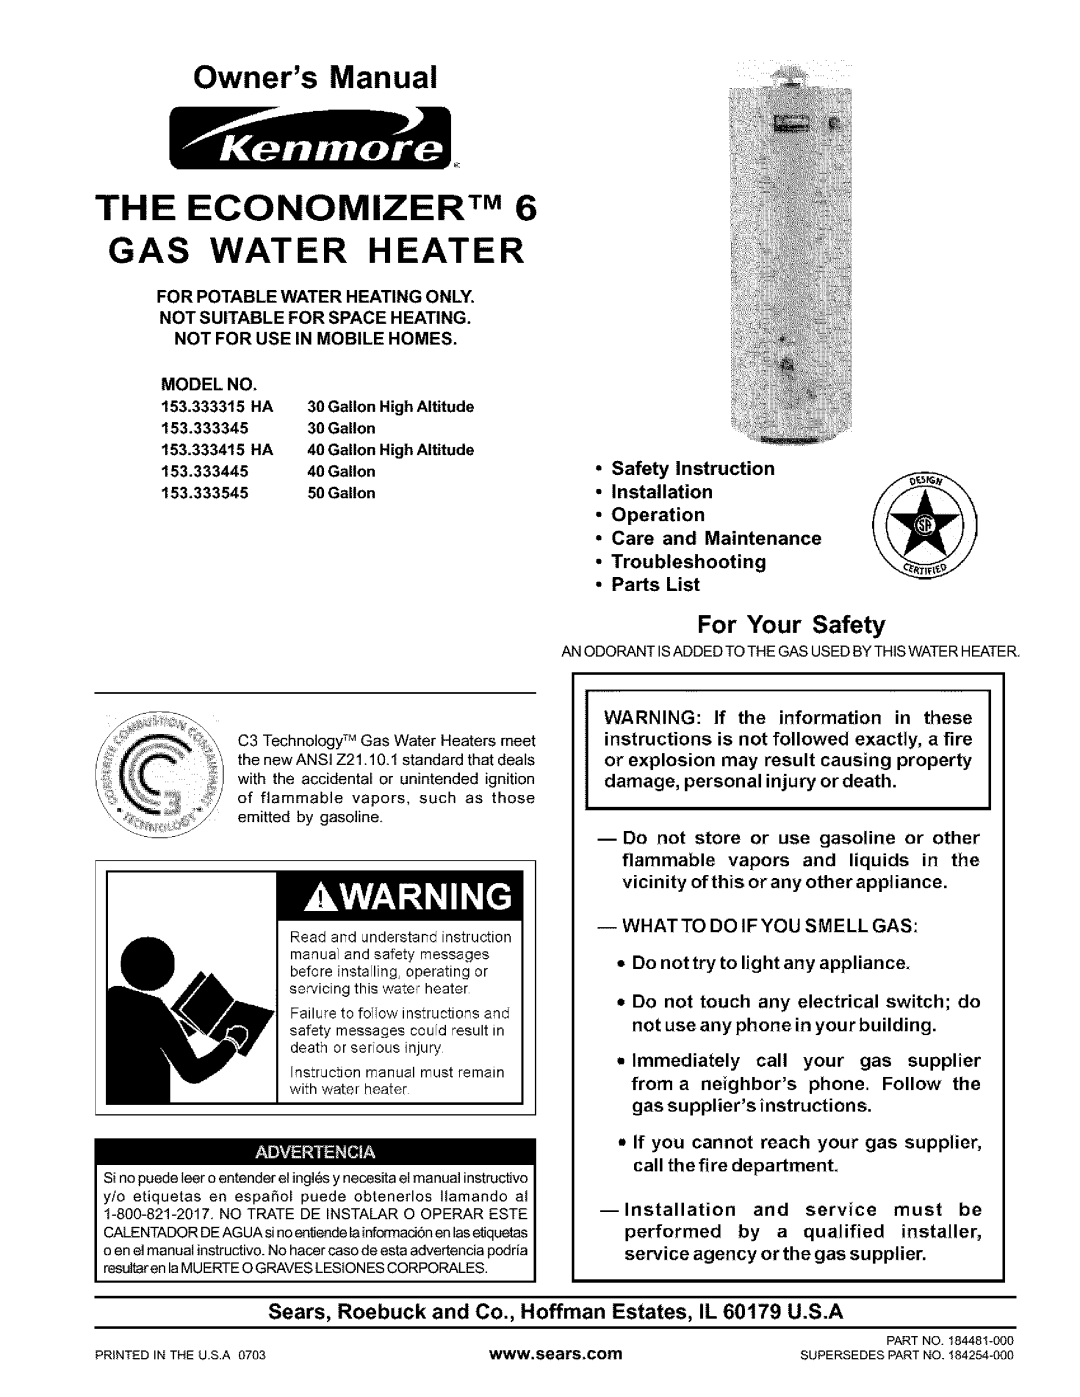 Kenmore 153.333545, 153.333345, 153.333415 HA, 153.333445 owner manual The Economizer Tm Gas Water Heater, For Your Safety 